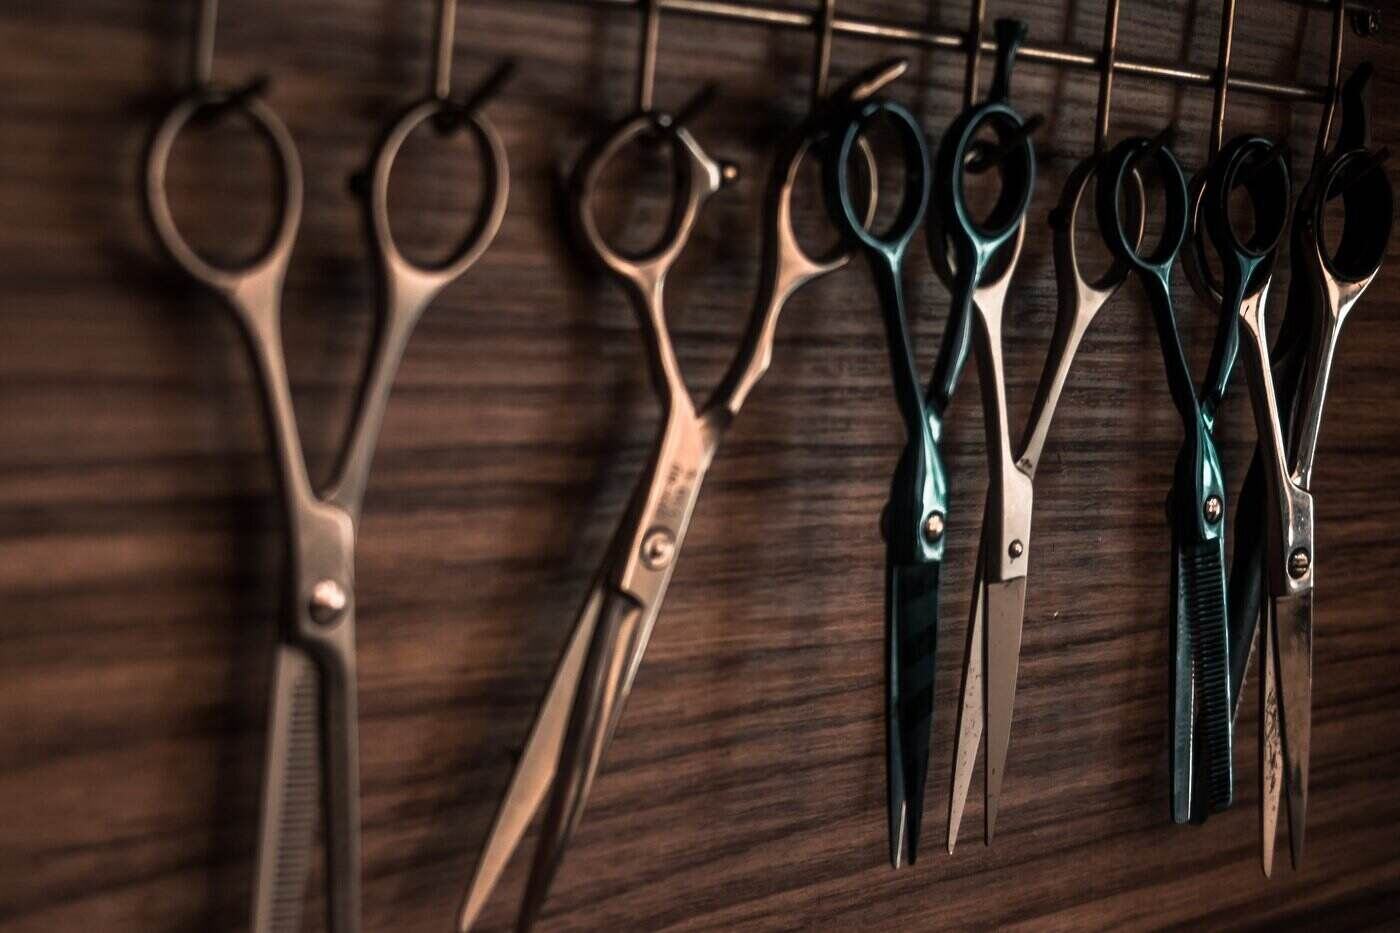 pairs of scissors hanging up - essential tools for diy projects